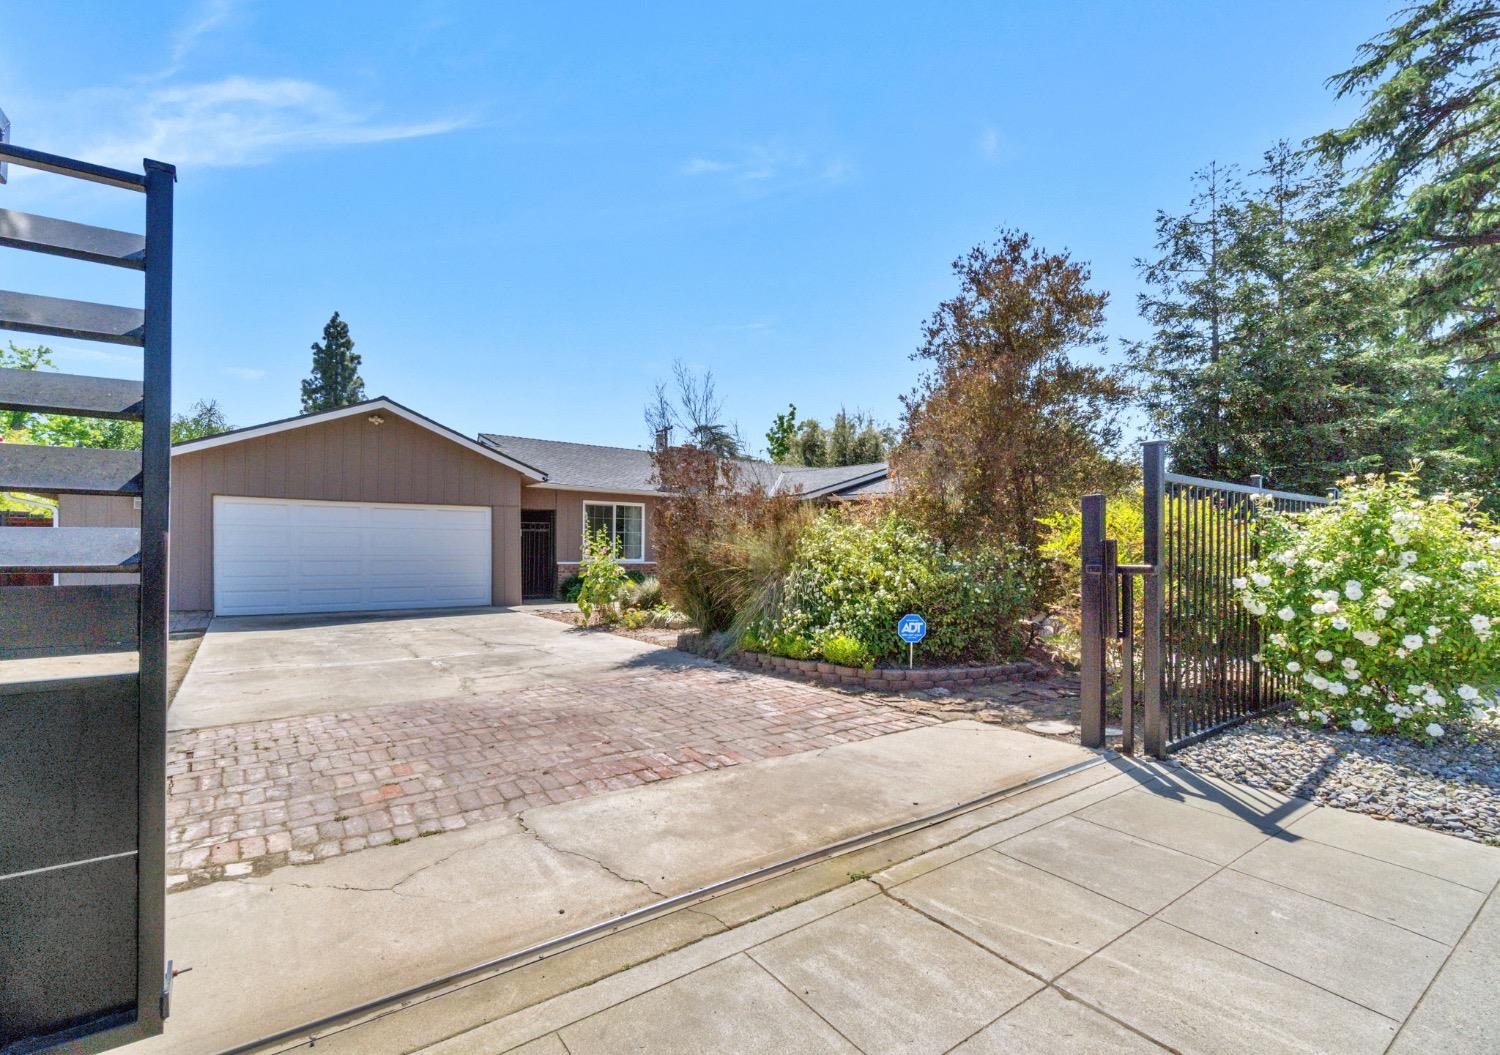 Photo of 1265 W Barstow Ave in Fresno, CA